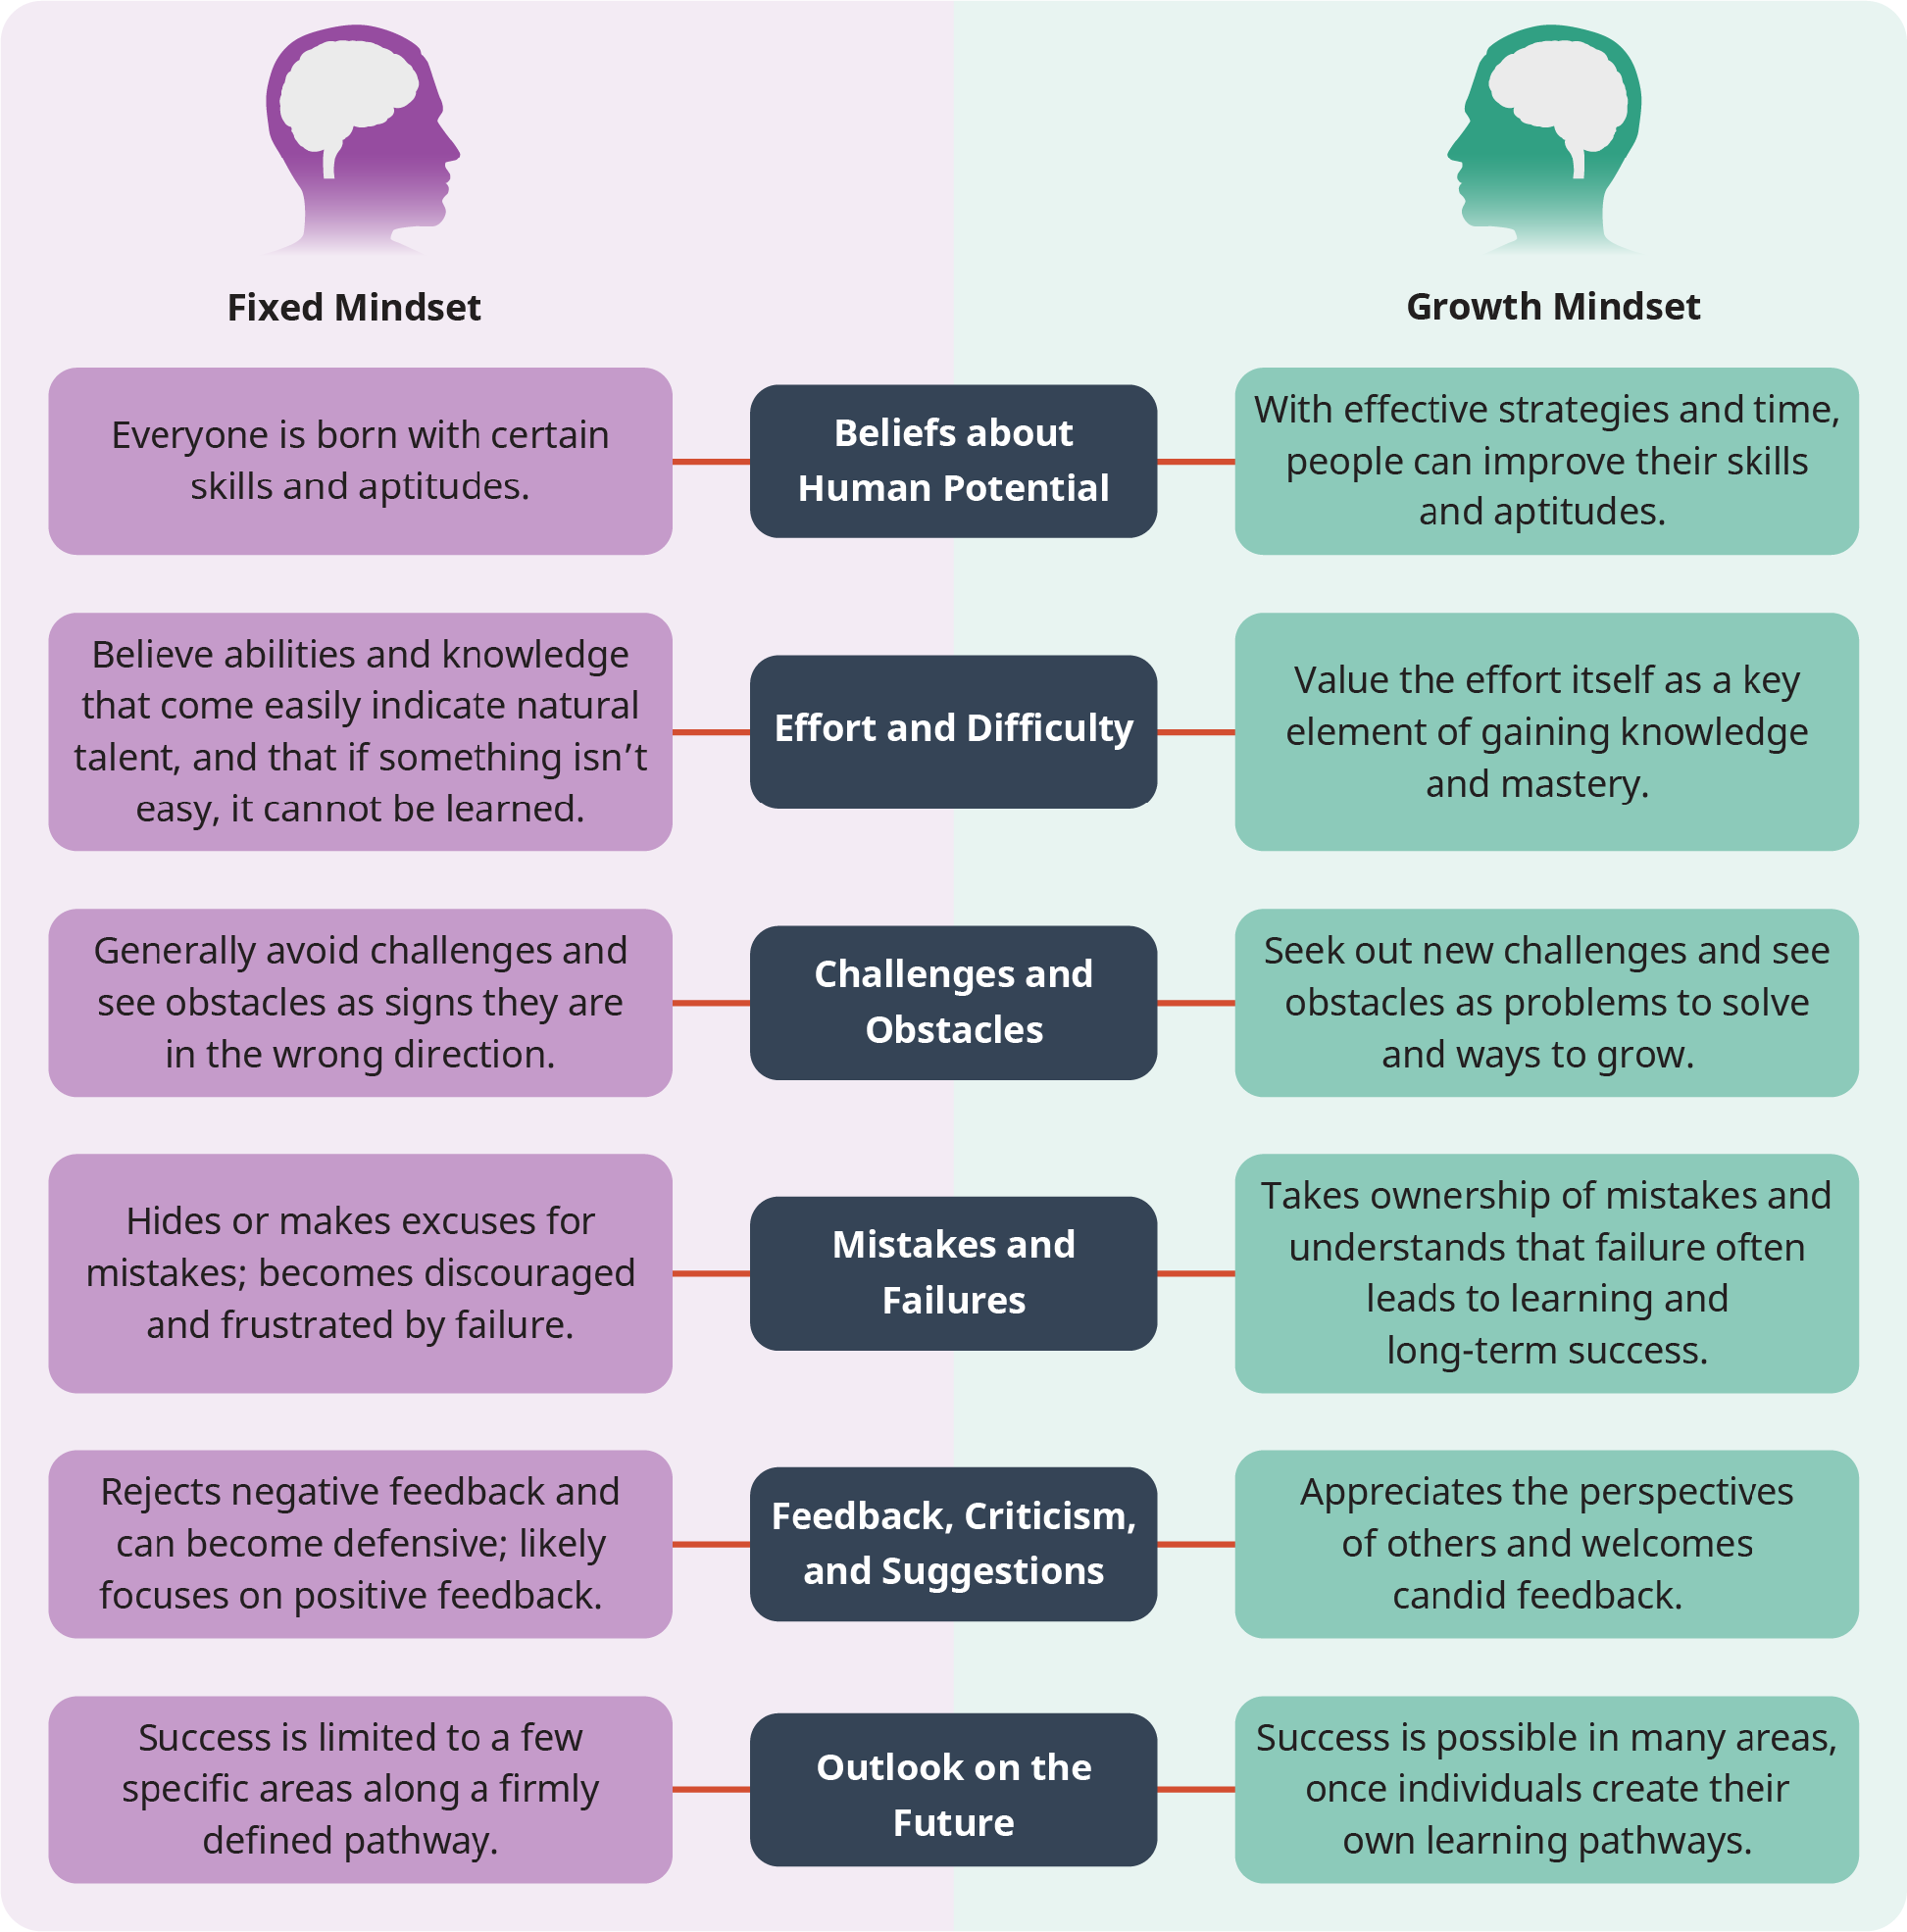 A diagram illustrates the comparison between “Fixed Mindset” and “Growth Mindset” based on six different parameters.